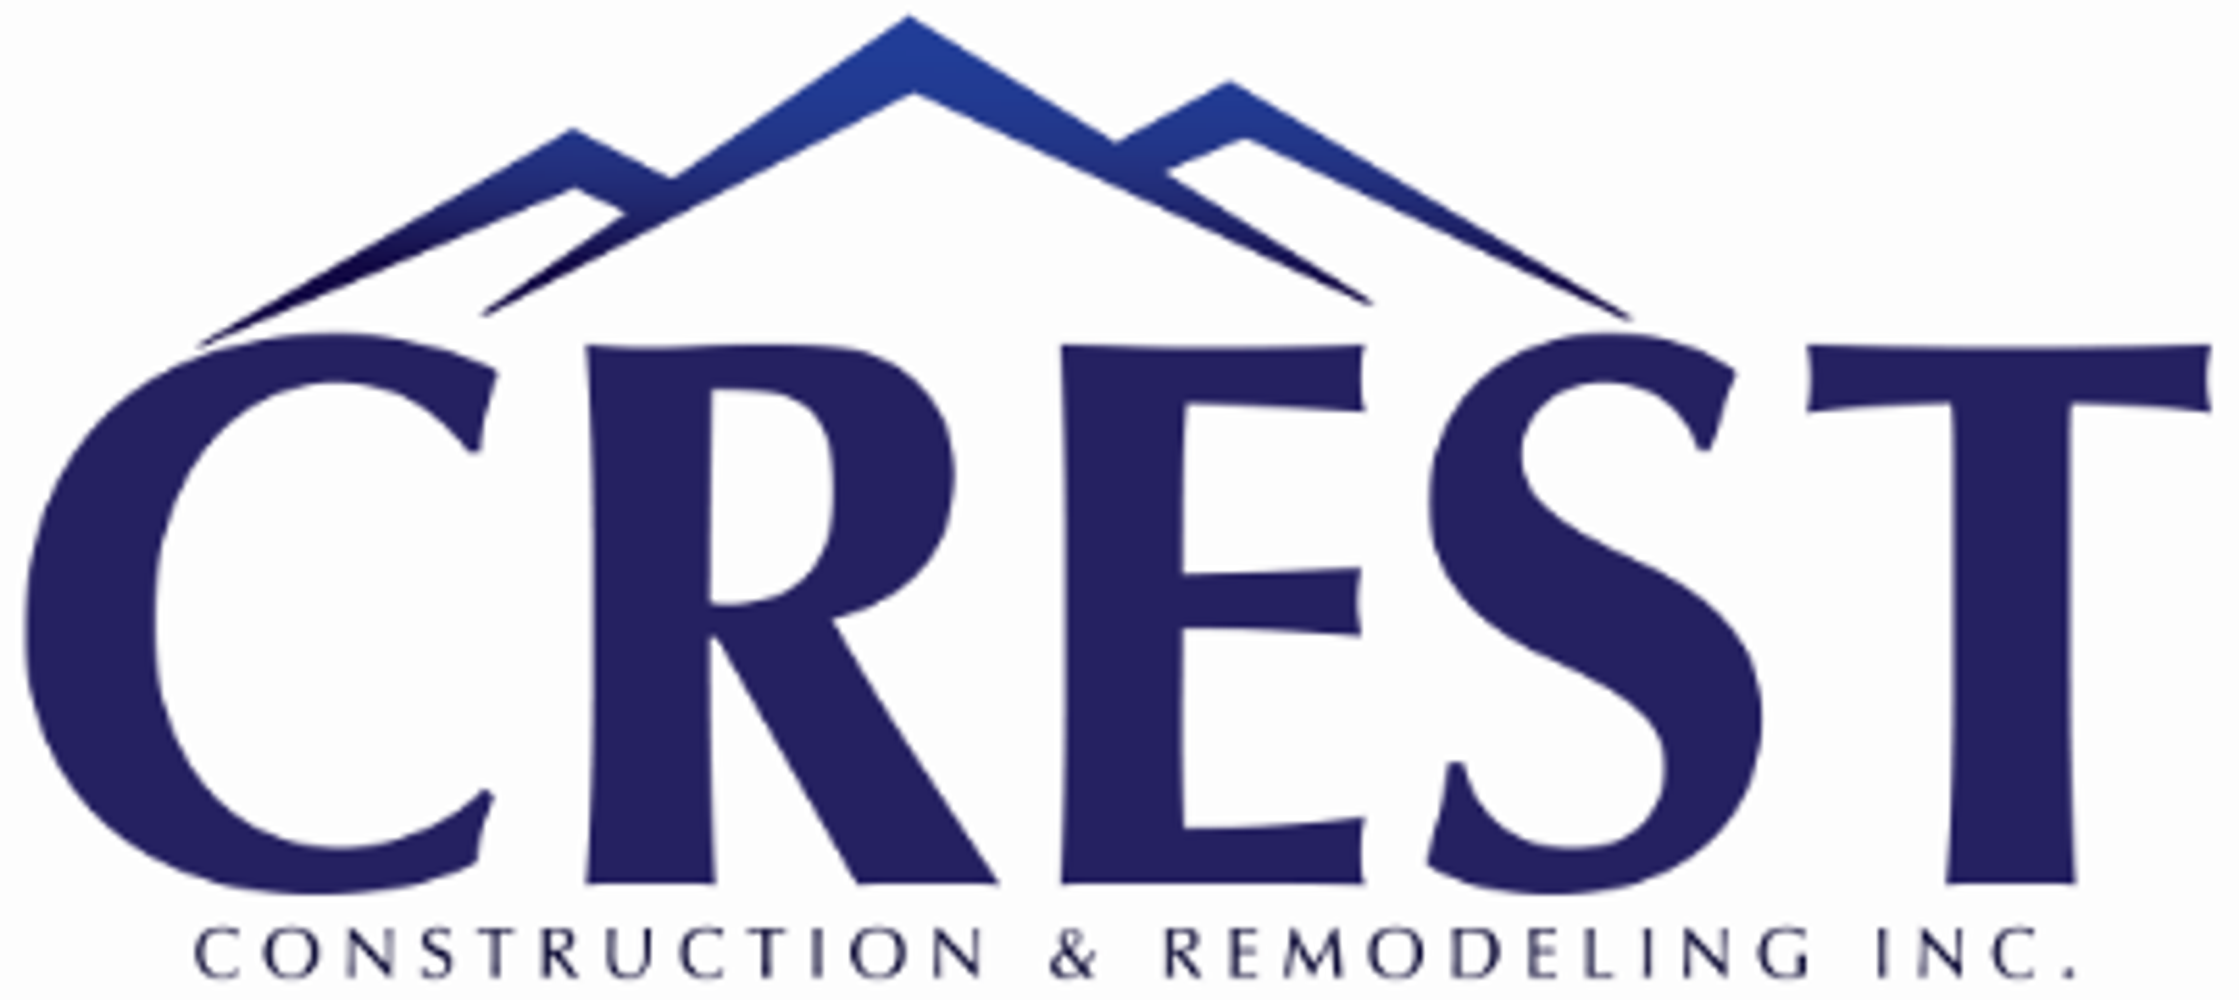 Crest Home Remodeling Project's